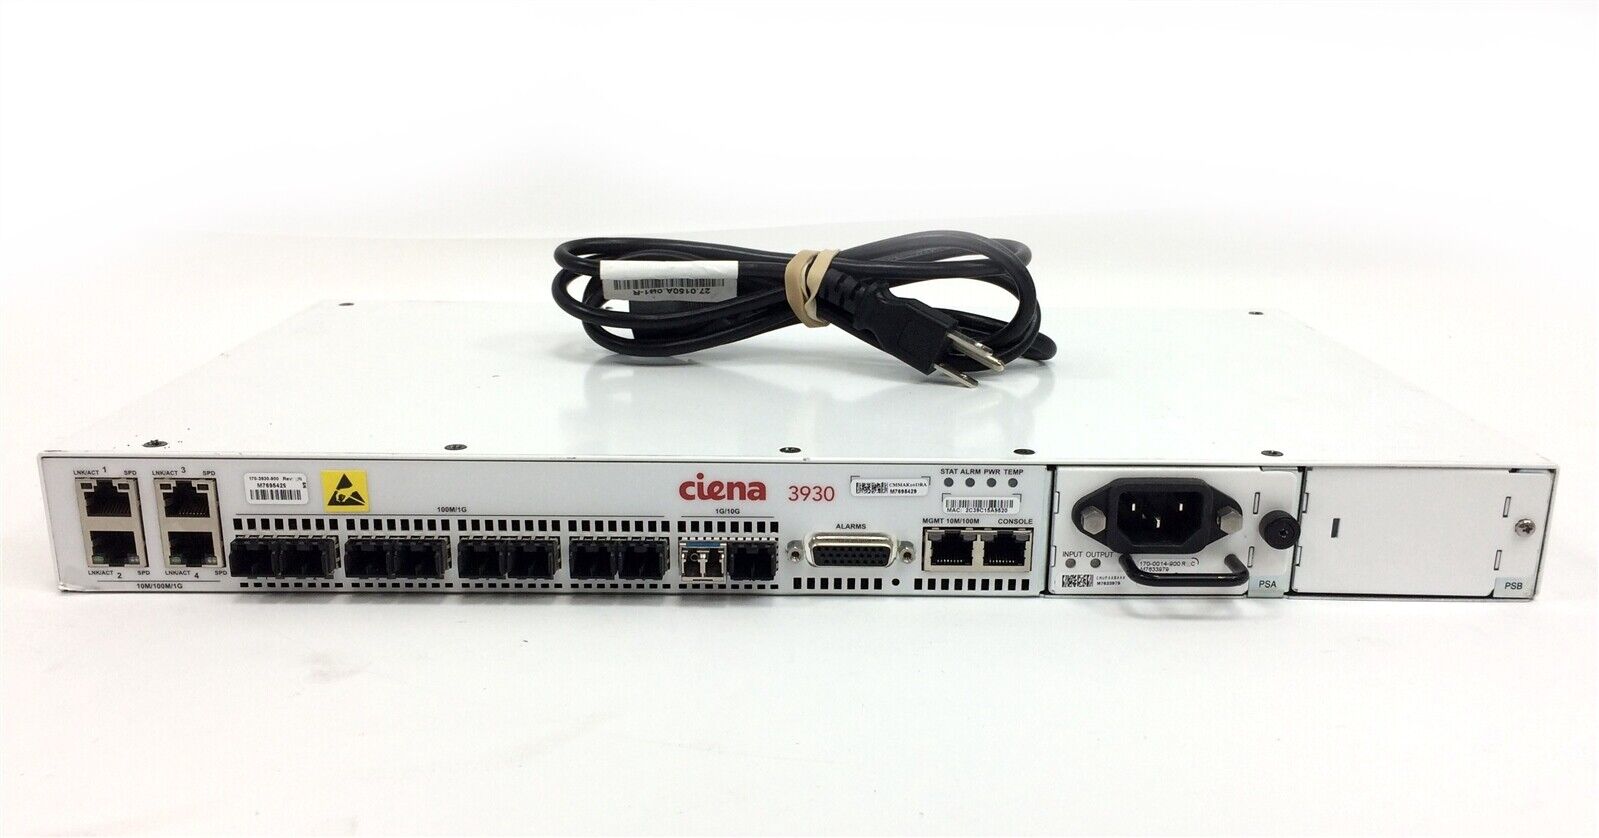 Ciena 3930 Service Delivery Switch 170-3930-900 No Rack ears